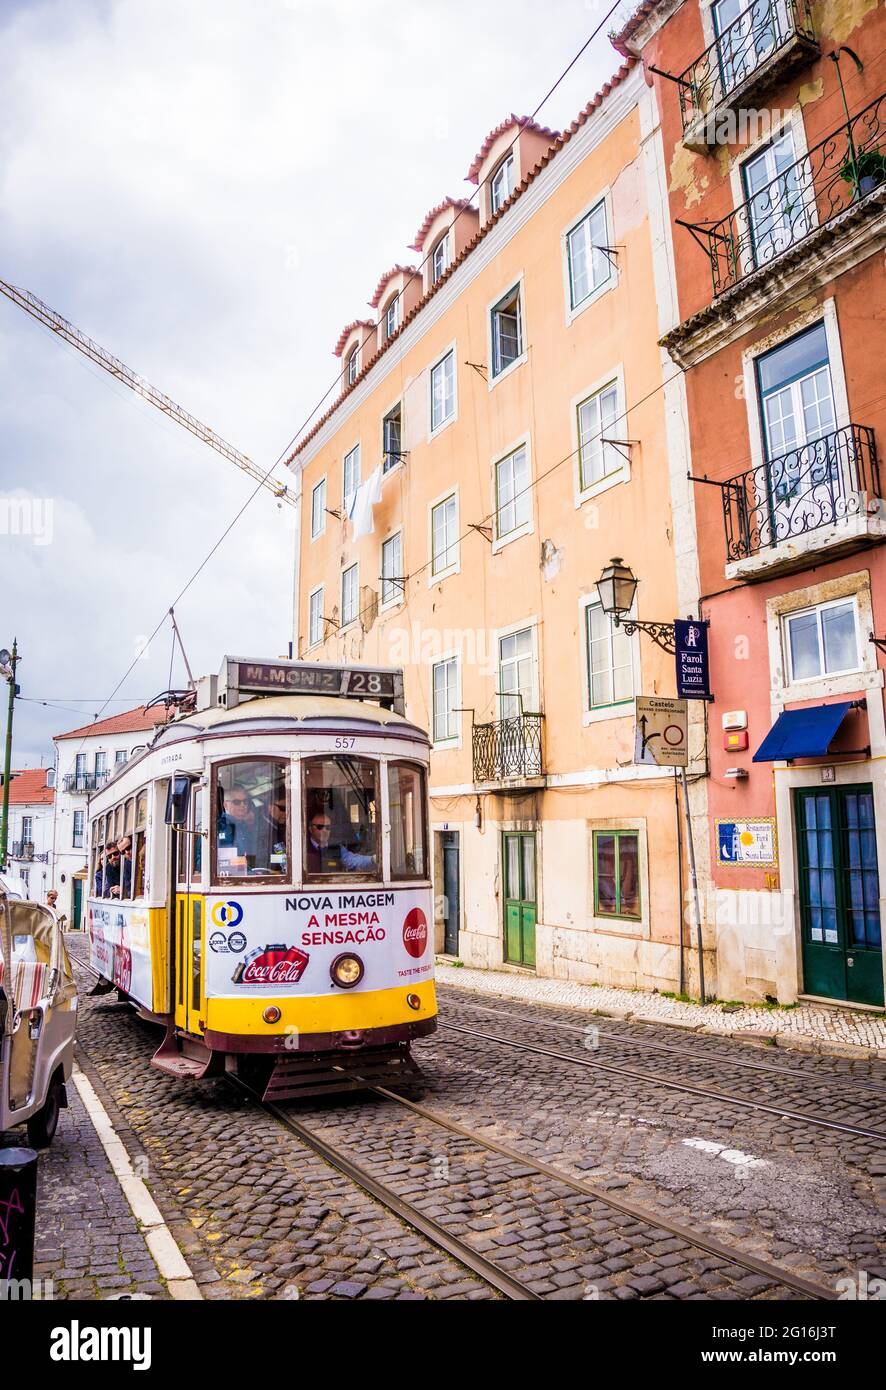 LISBON, PORTUGAL - MARCH 25, 2017: Popular tourist old yellow vintage tram number 28 on the street of Lisbon, Portugal Stock Photo